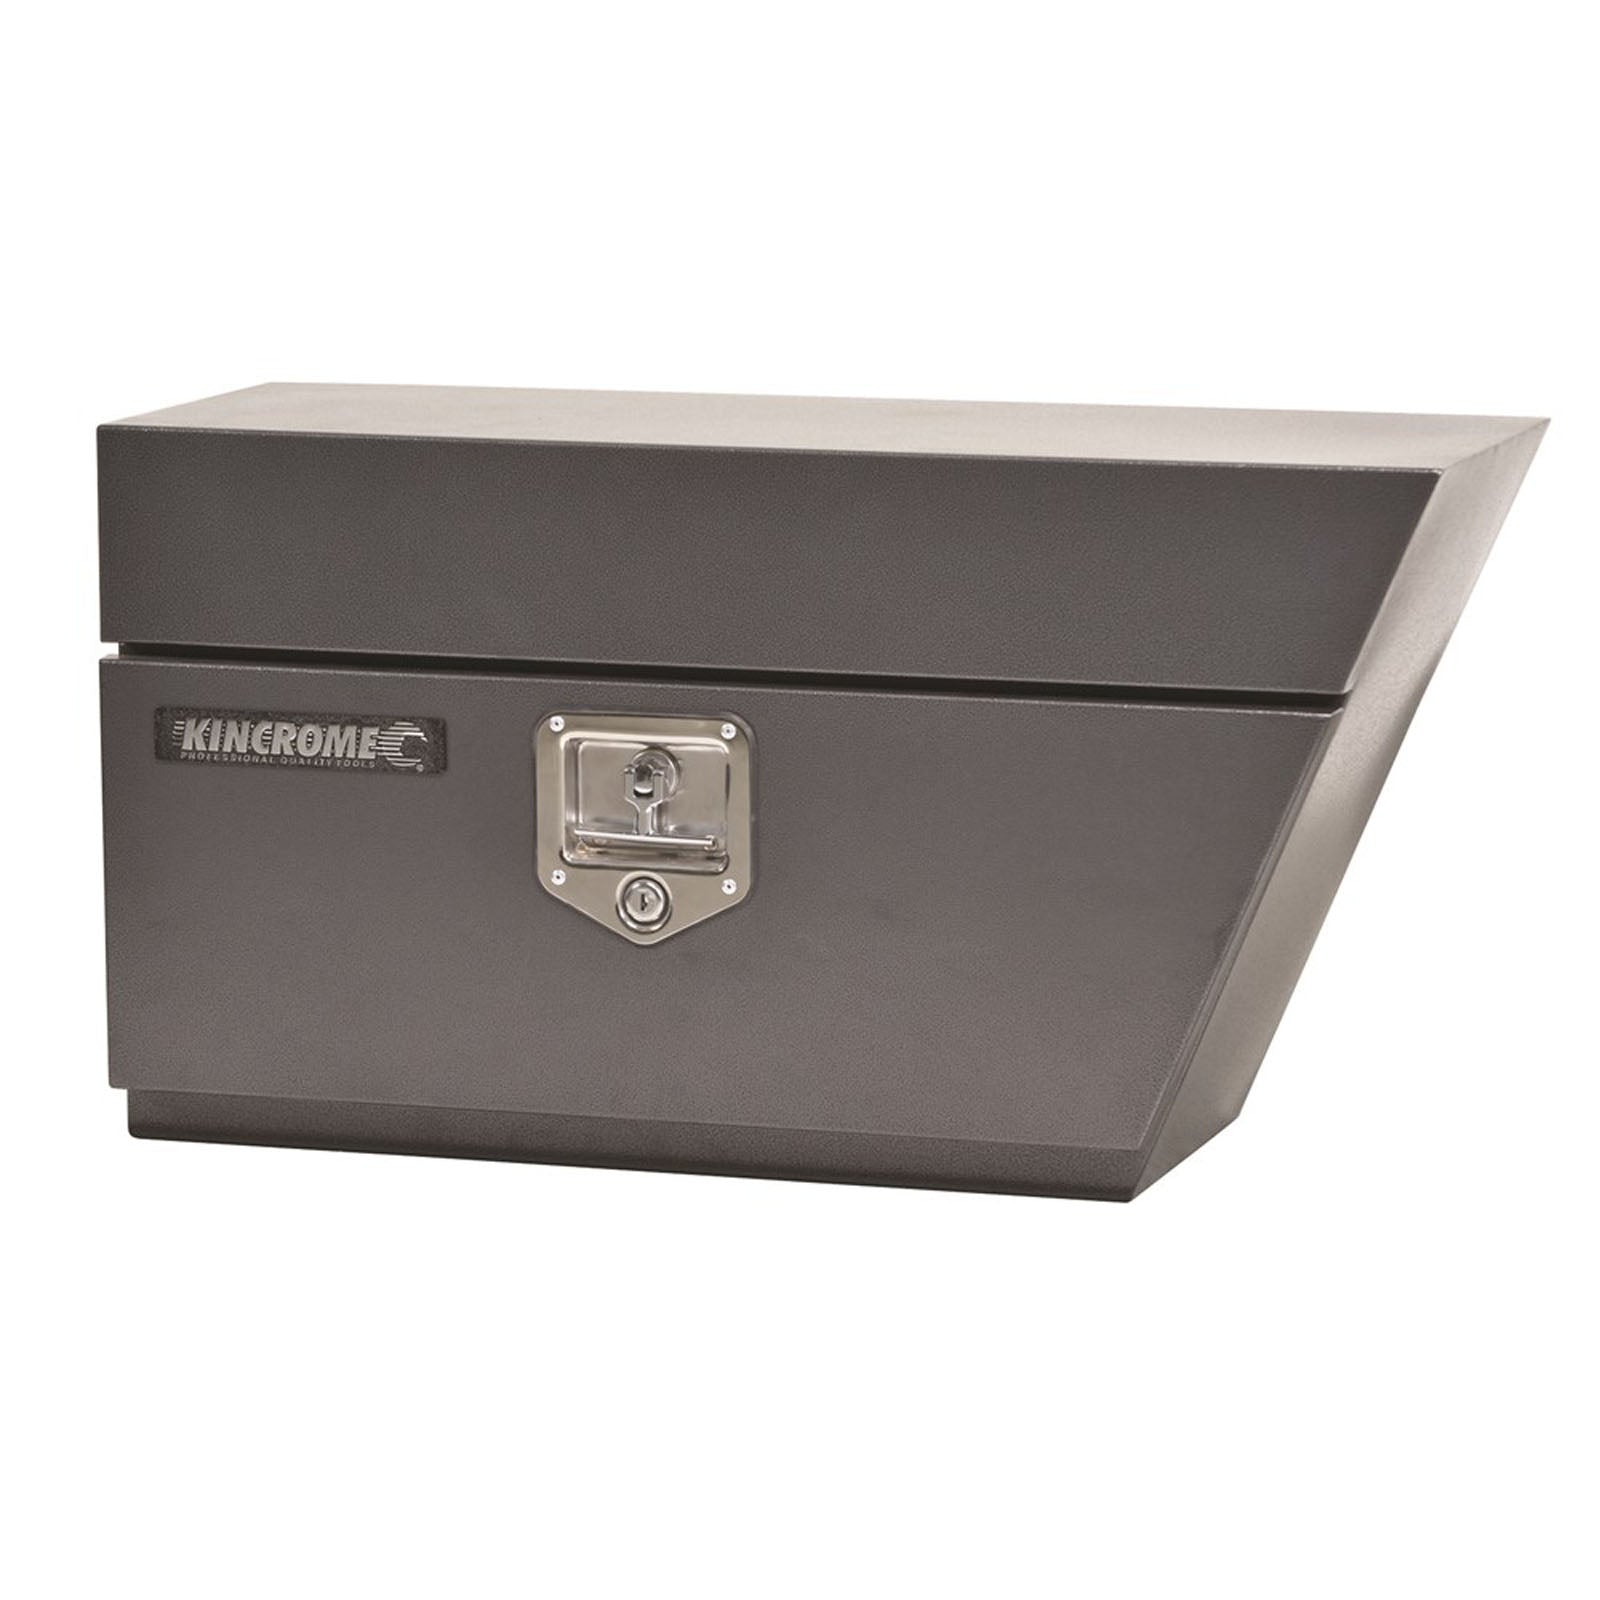 Under Ute Box Steel Right Side - 51029 by Kincrome